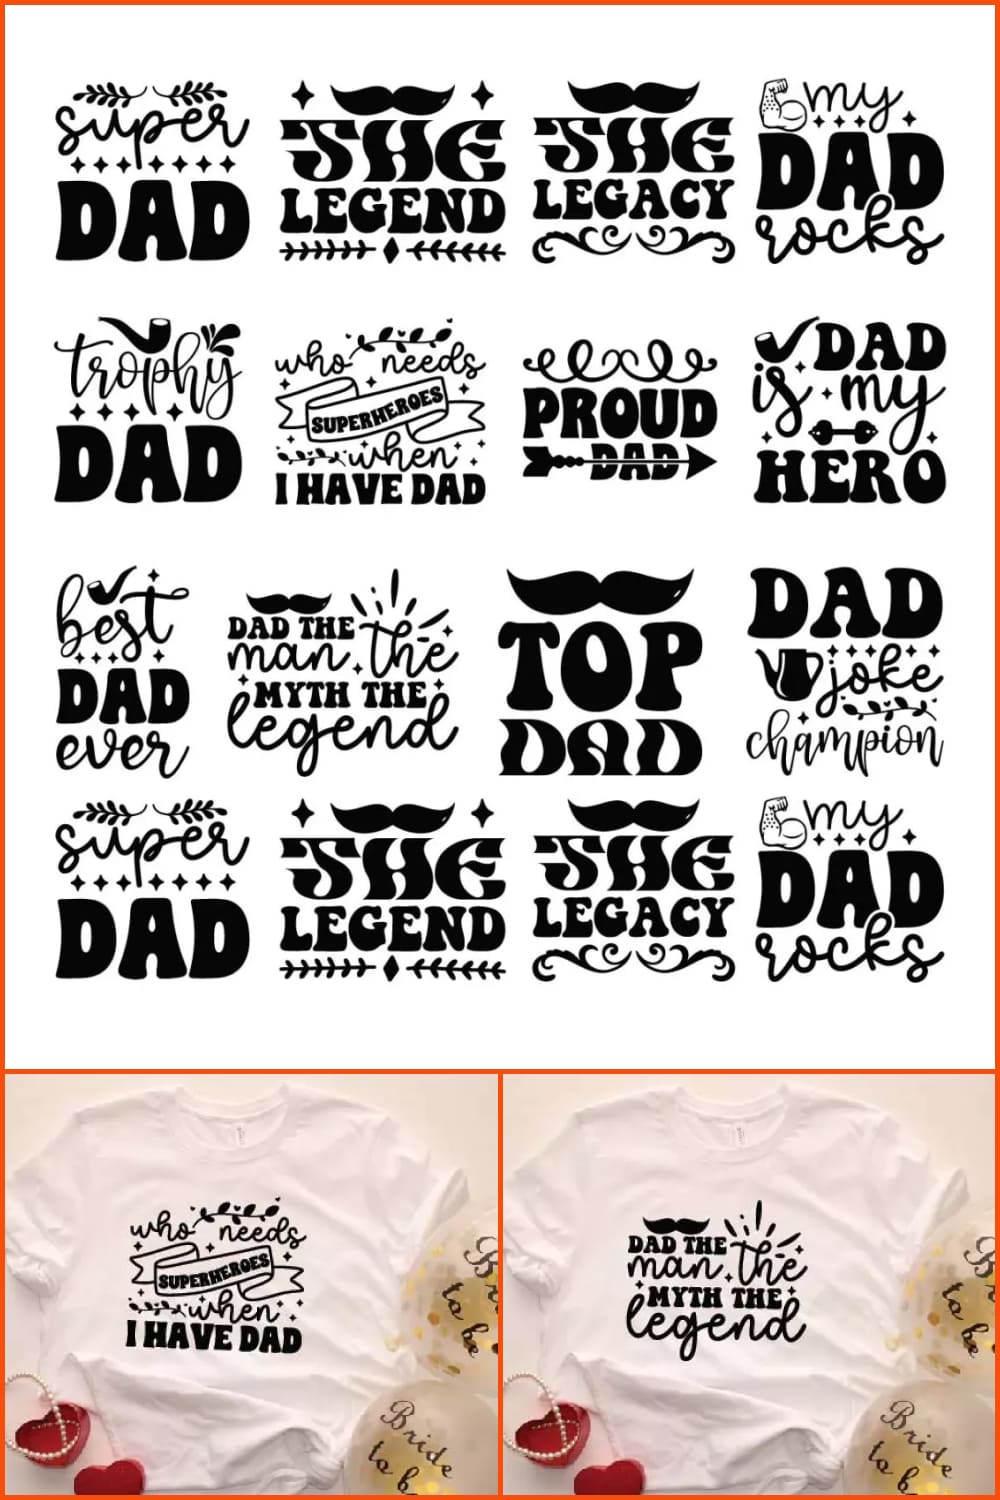 Cute inscriptions in black text about dad on a white background.